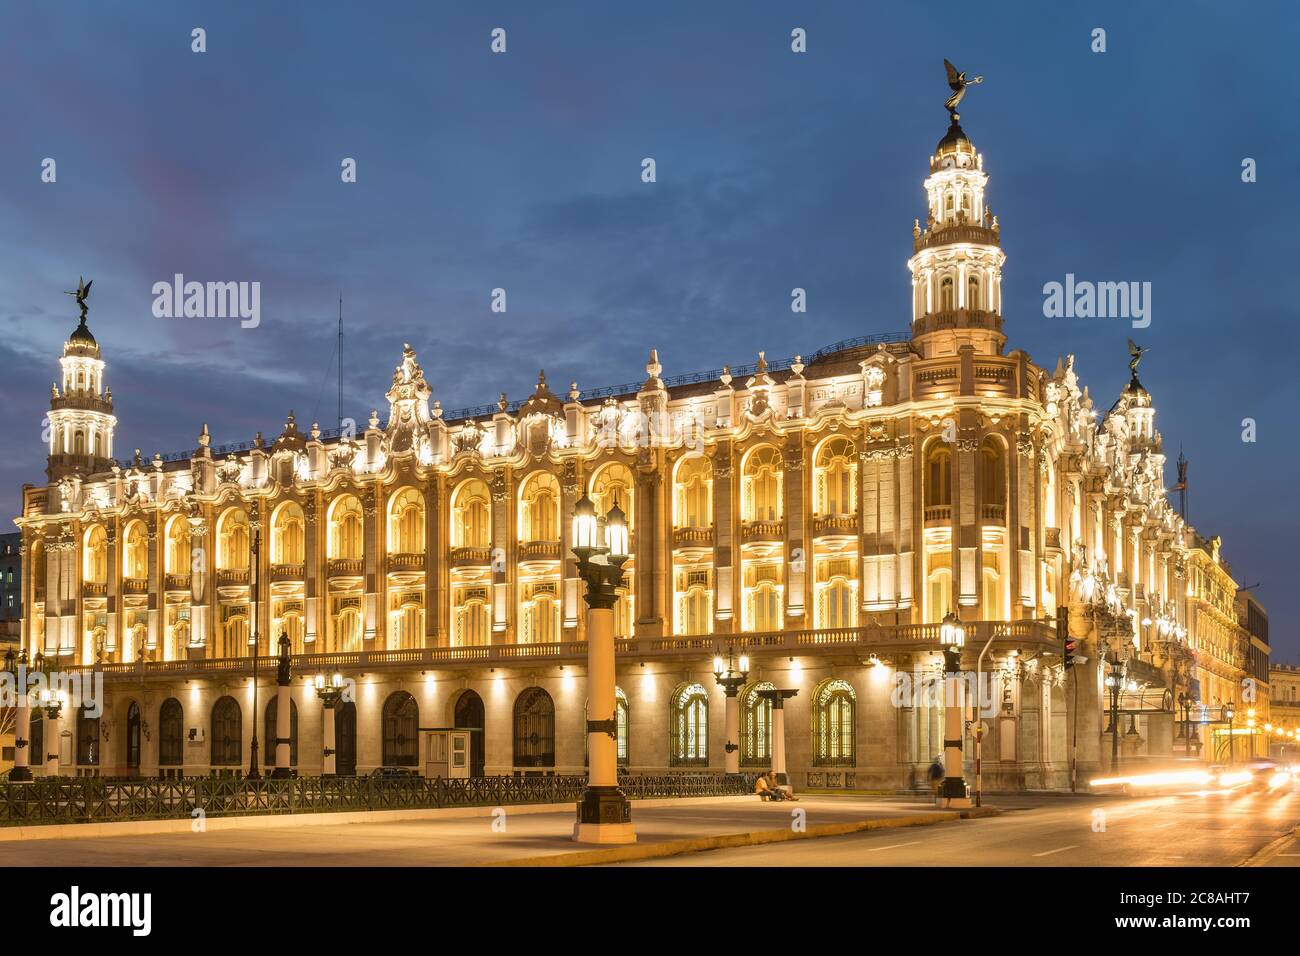 The Great Theater of Havana, home of the Cuban National Ballet, illuminated at sunset Stock Photo